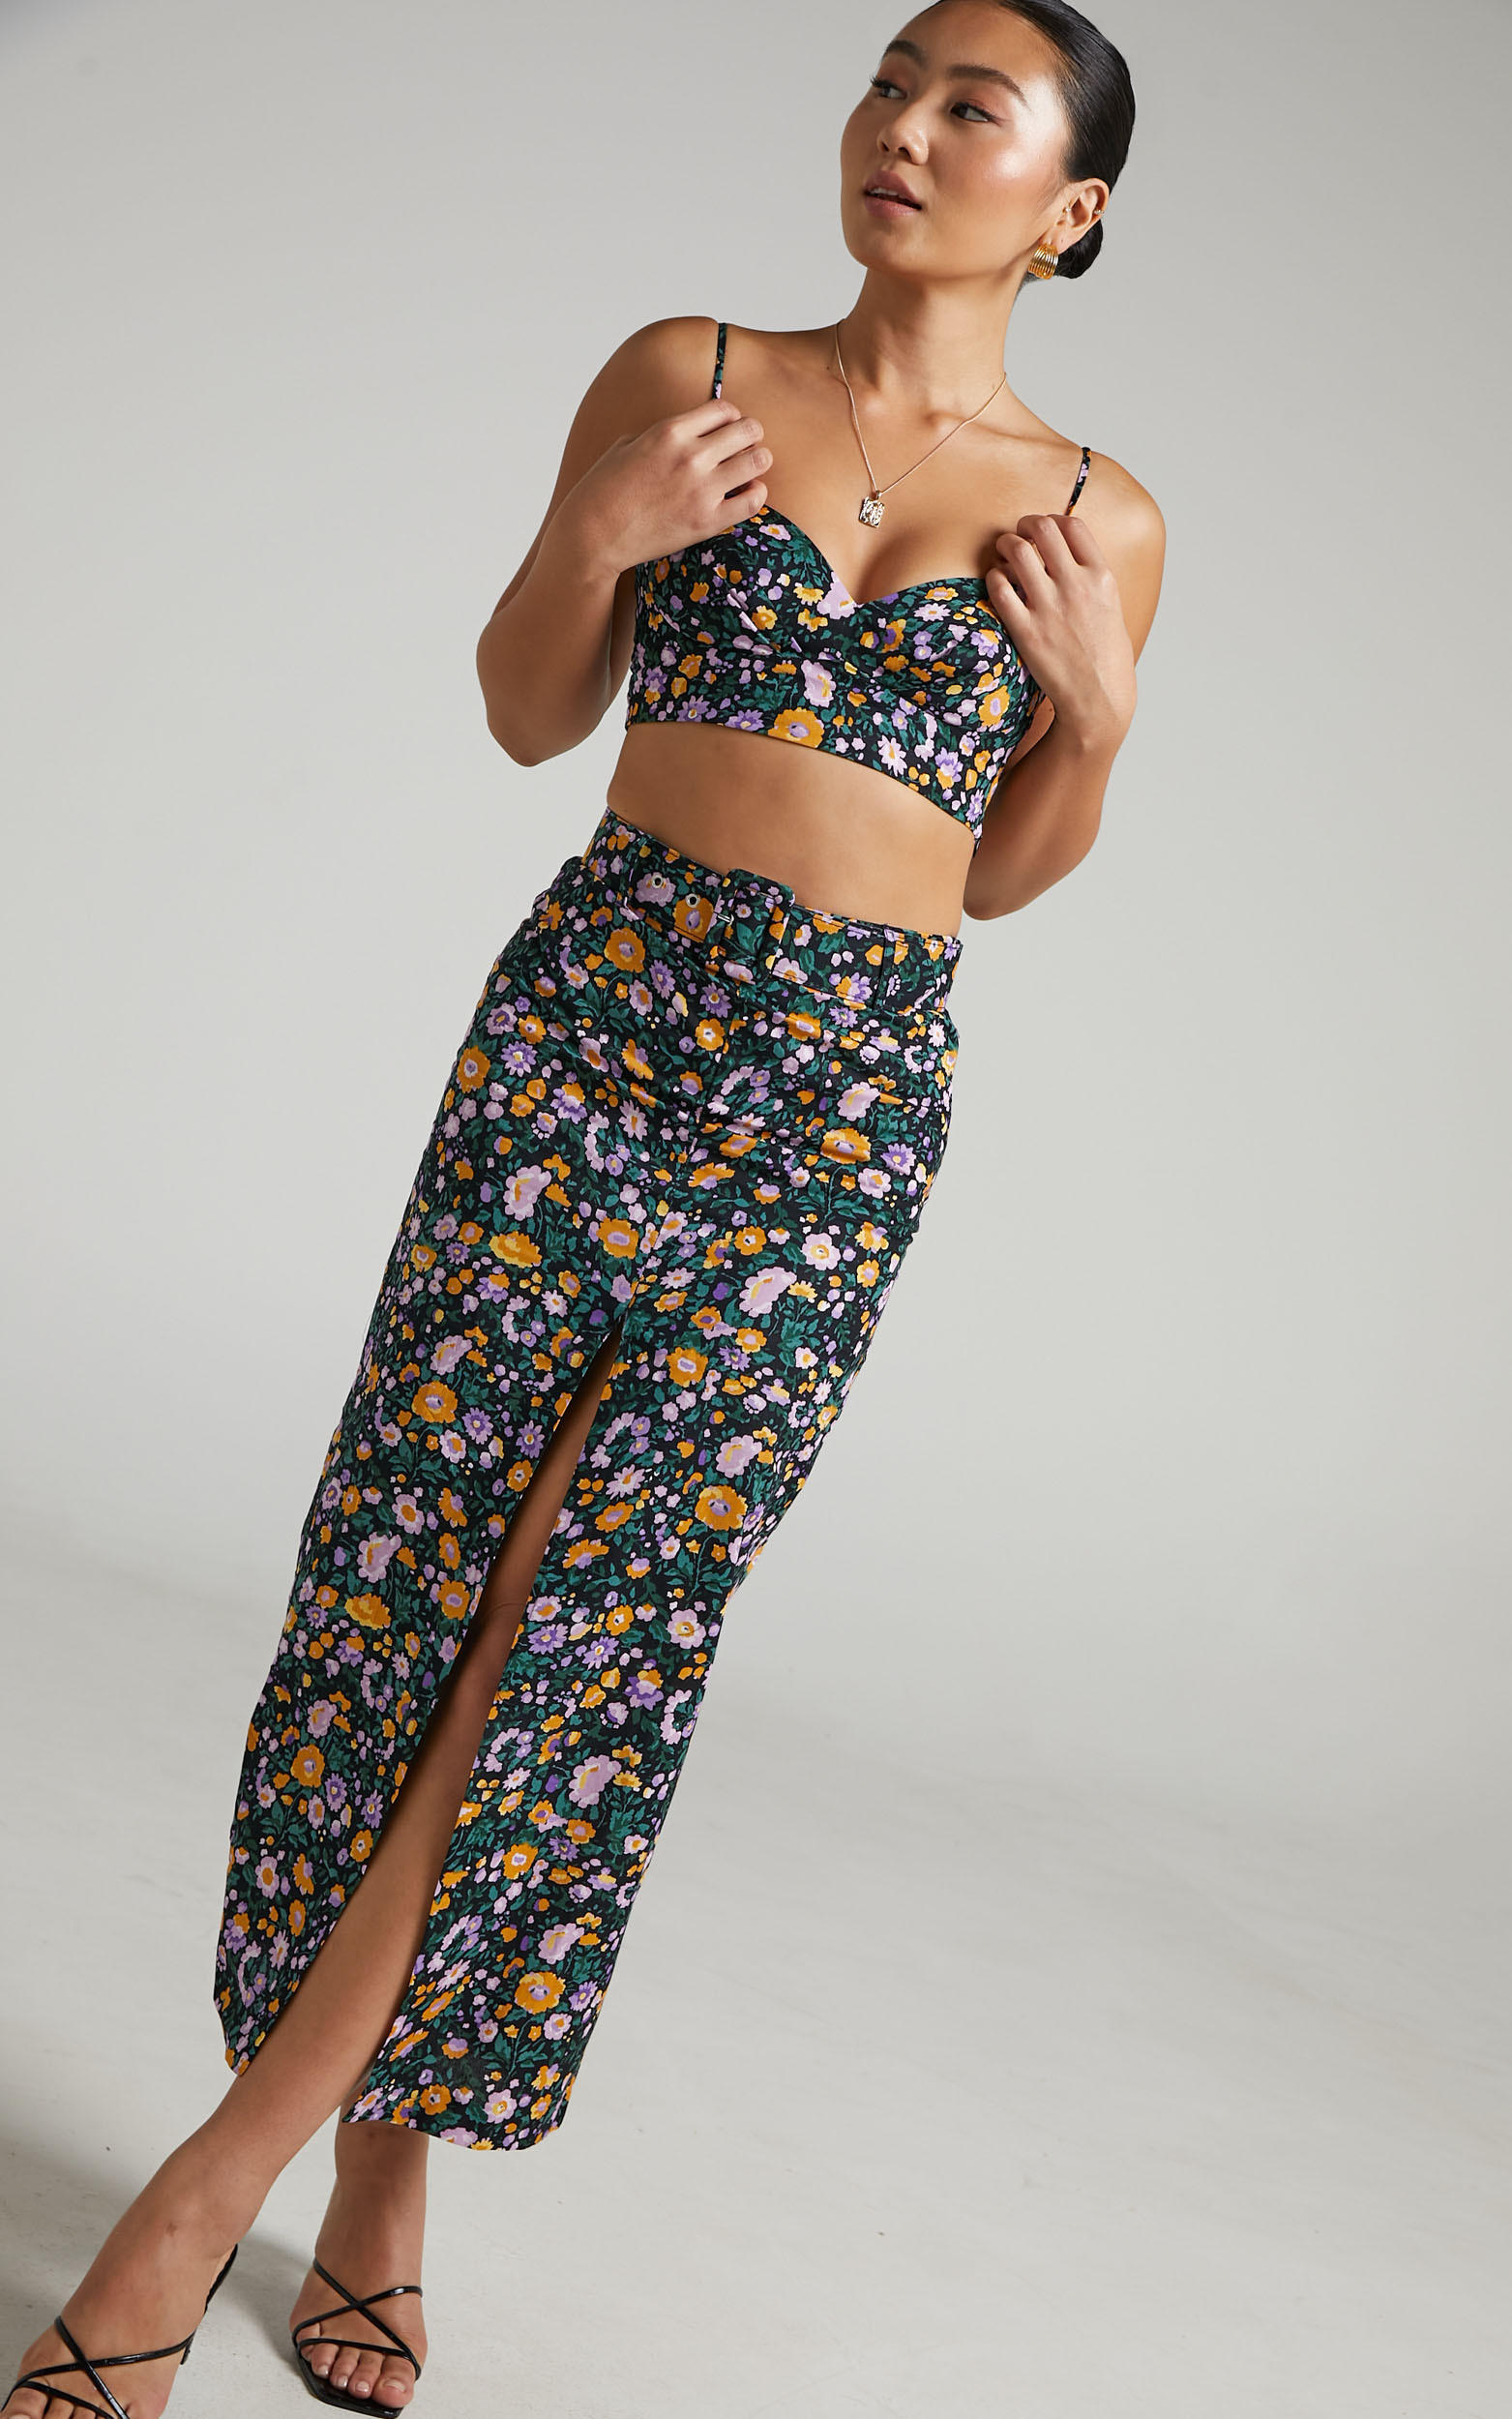 Freyda Crop Top and Midi Skirt Two Piece Set in Black Floral - 04, BLK1, hi-res image number null